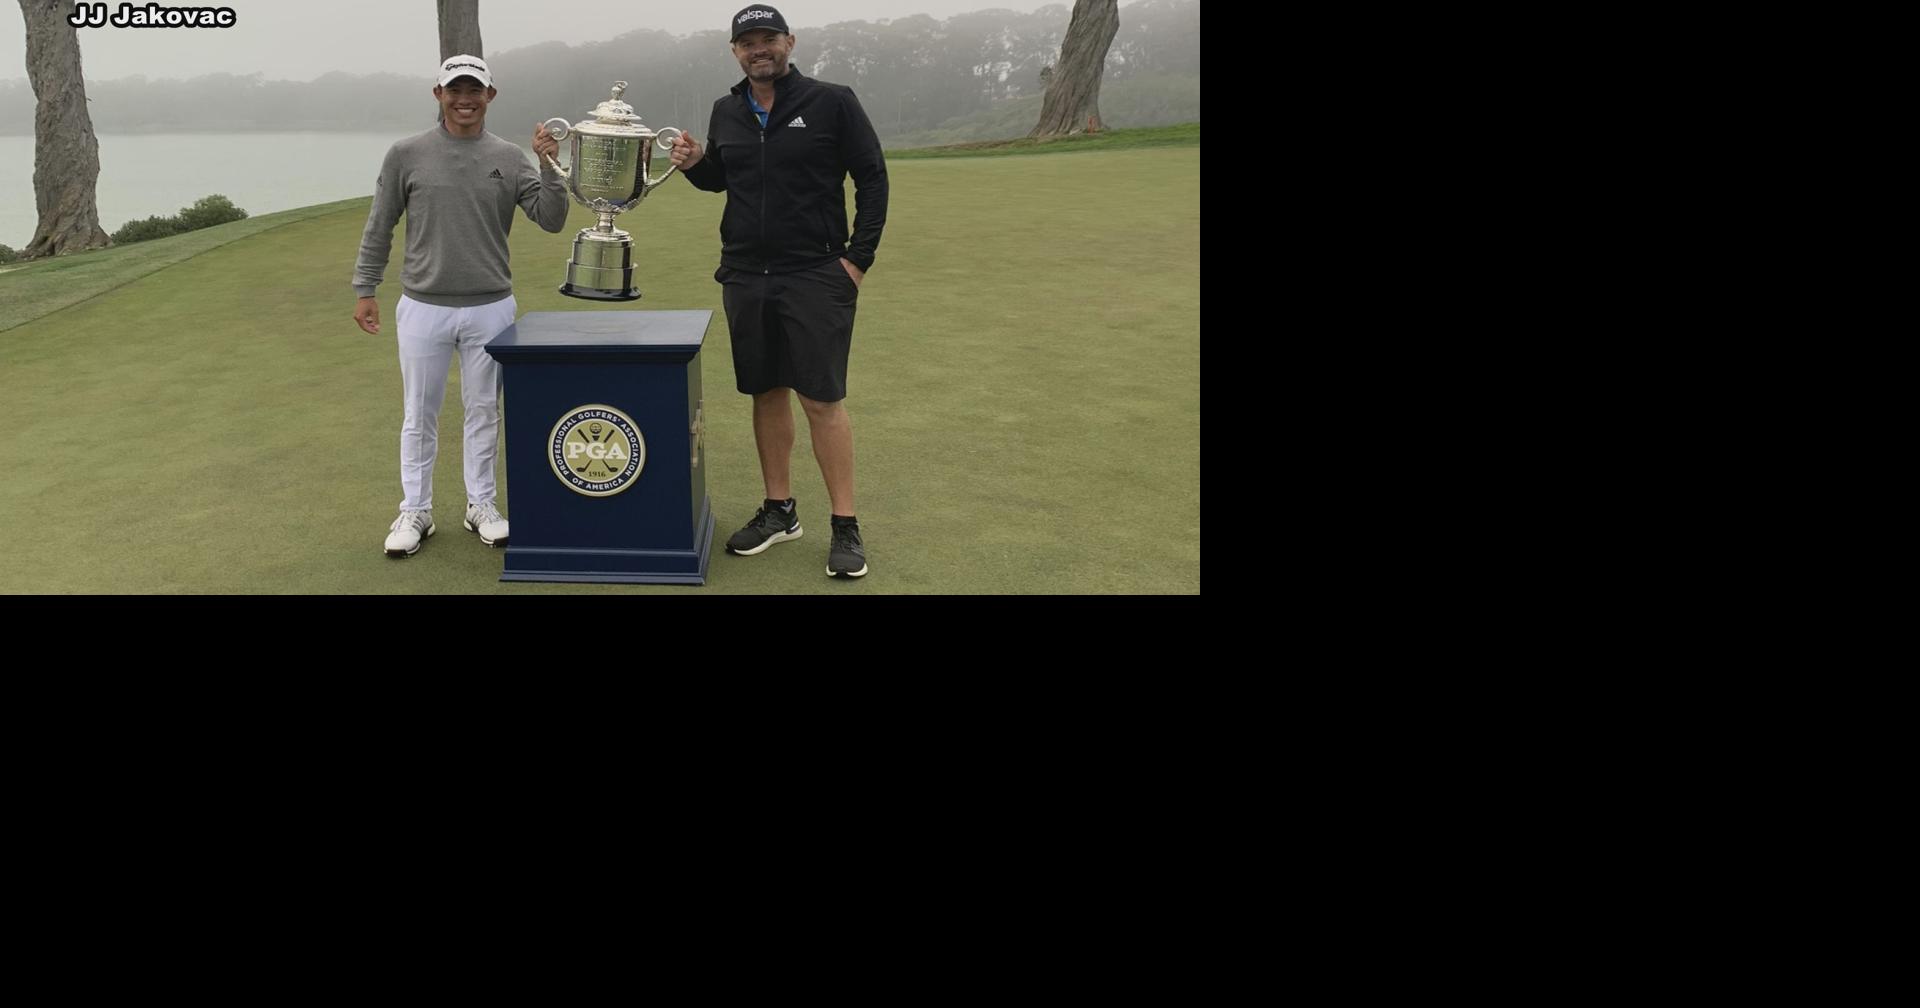 Chico State alum JJ Jakovac reflects on his success as a caddy |  New